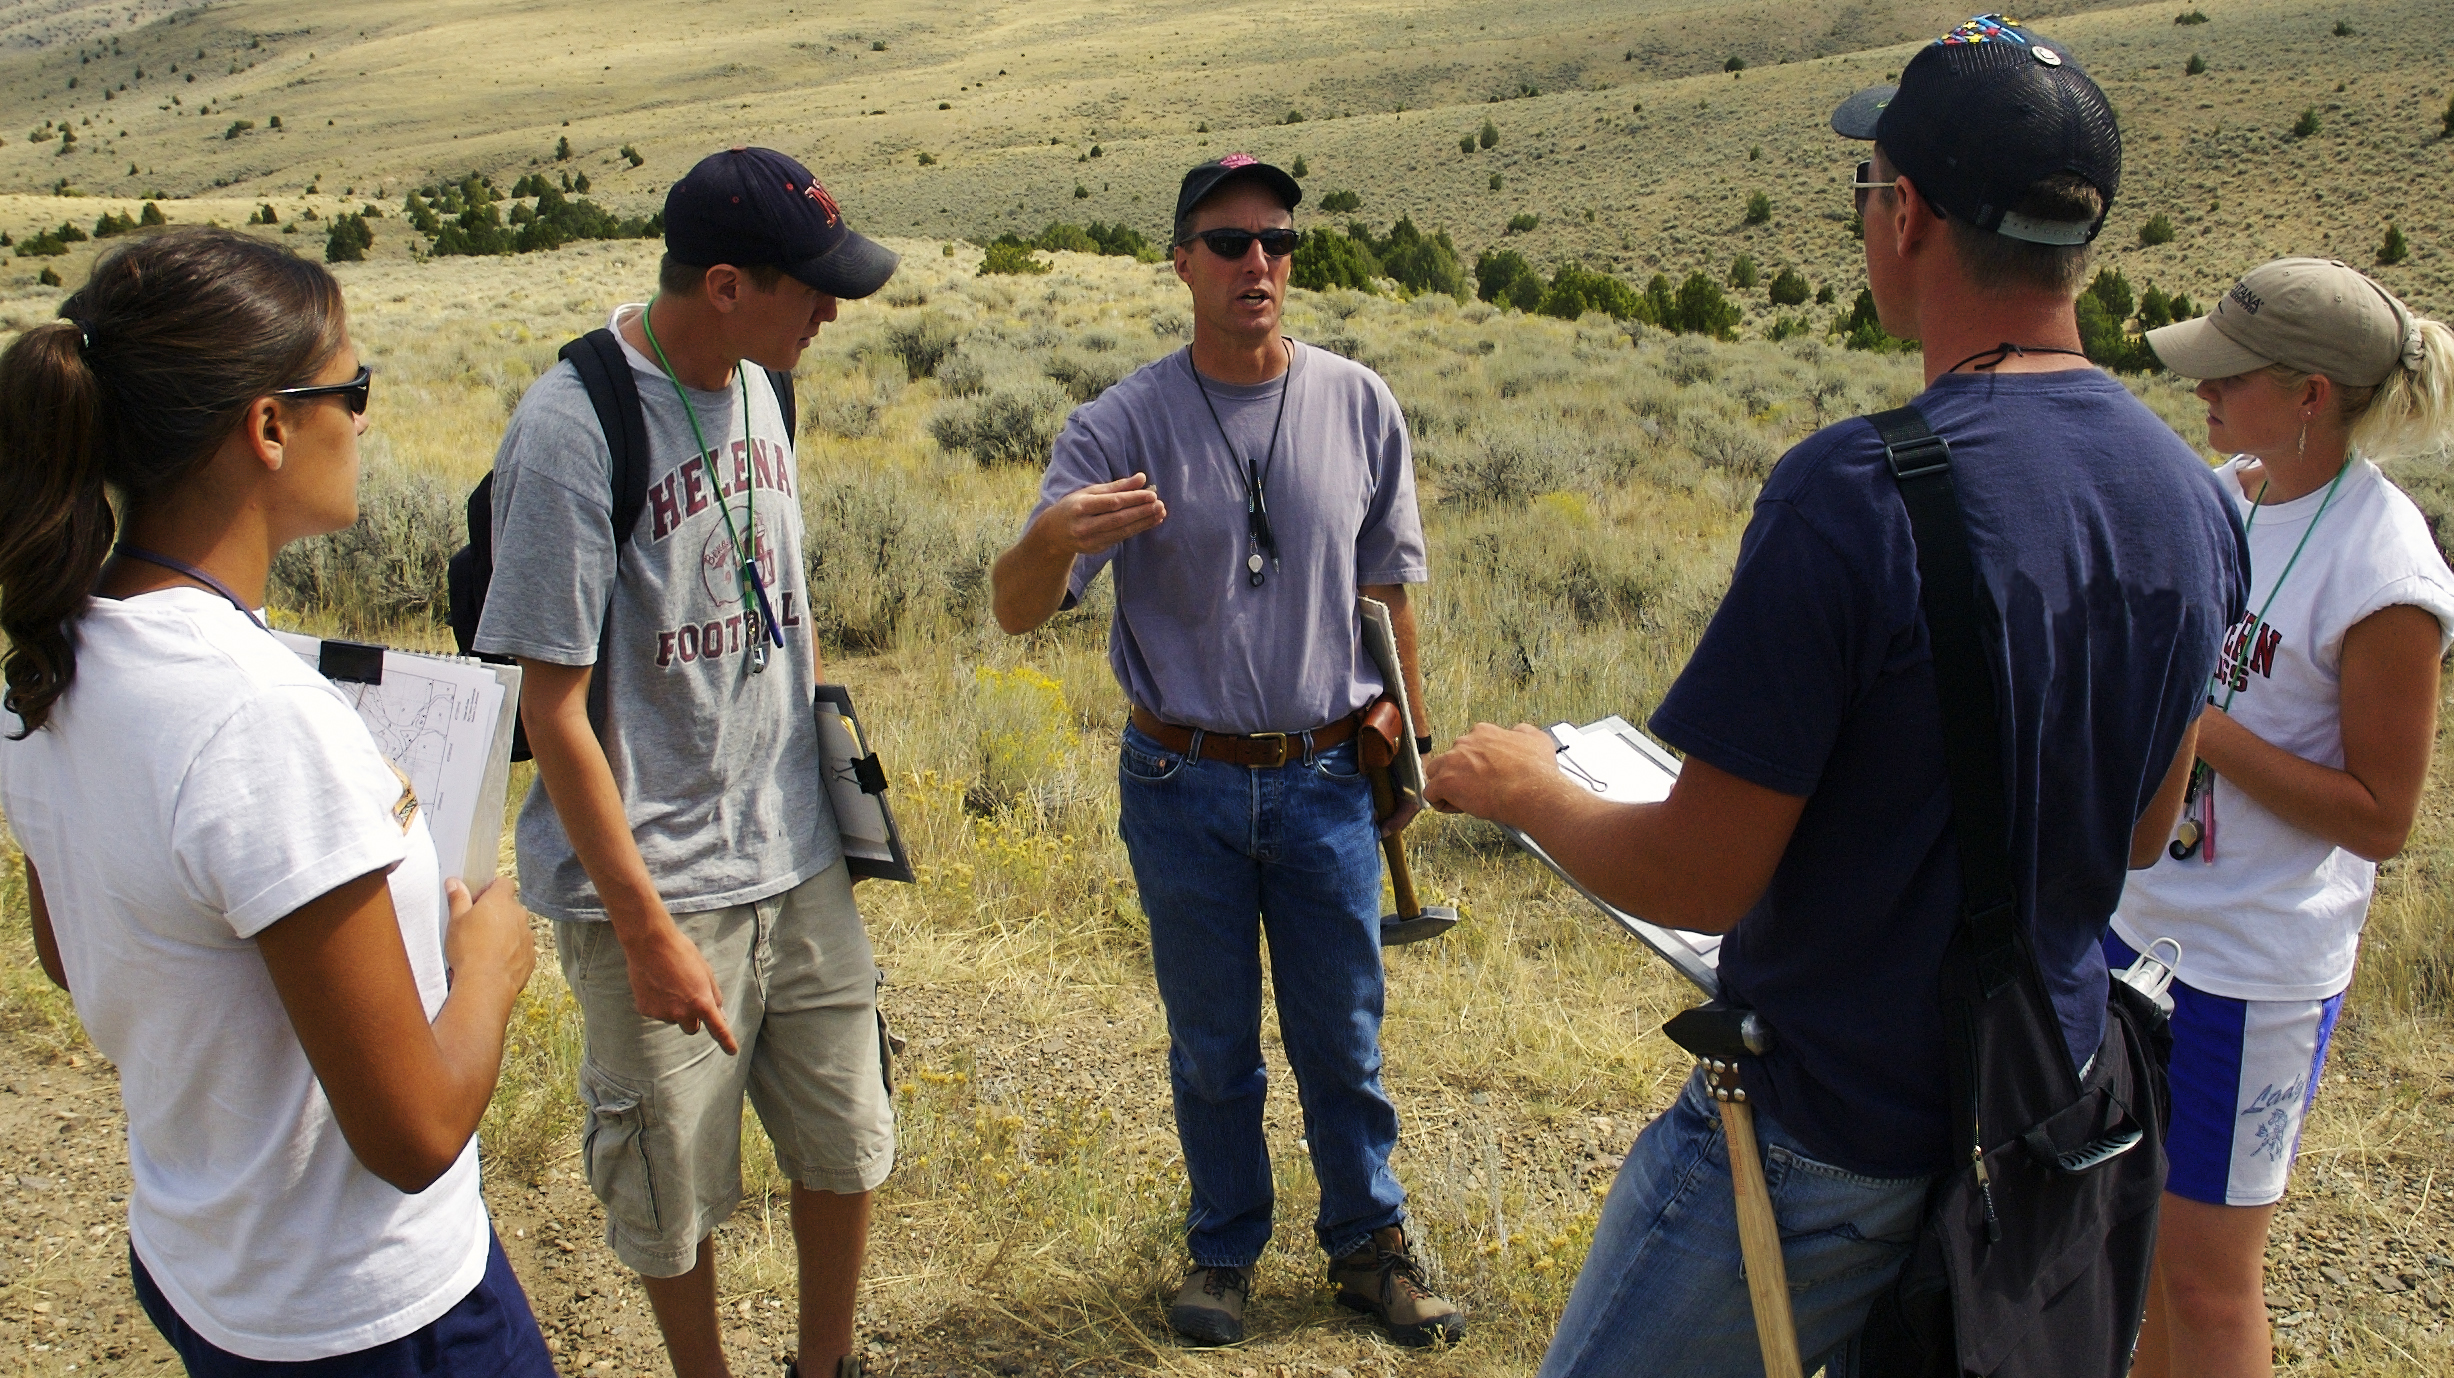 Professor Rob Thomas visiting with students in the field